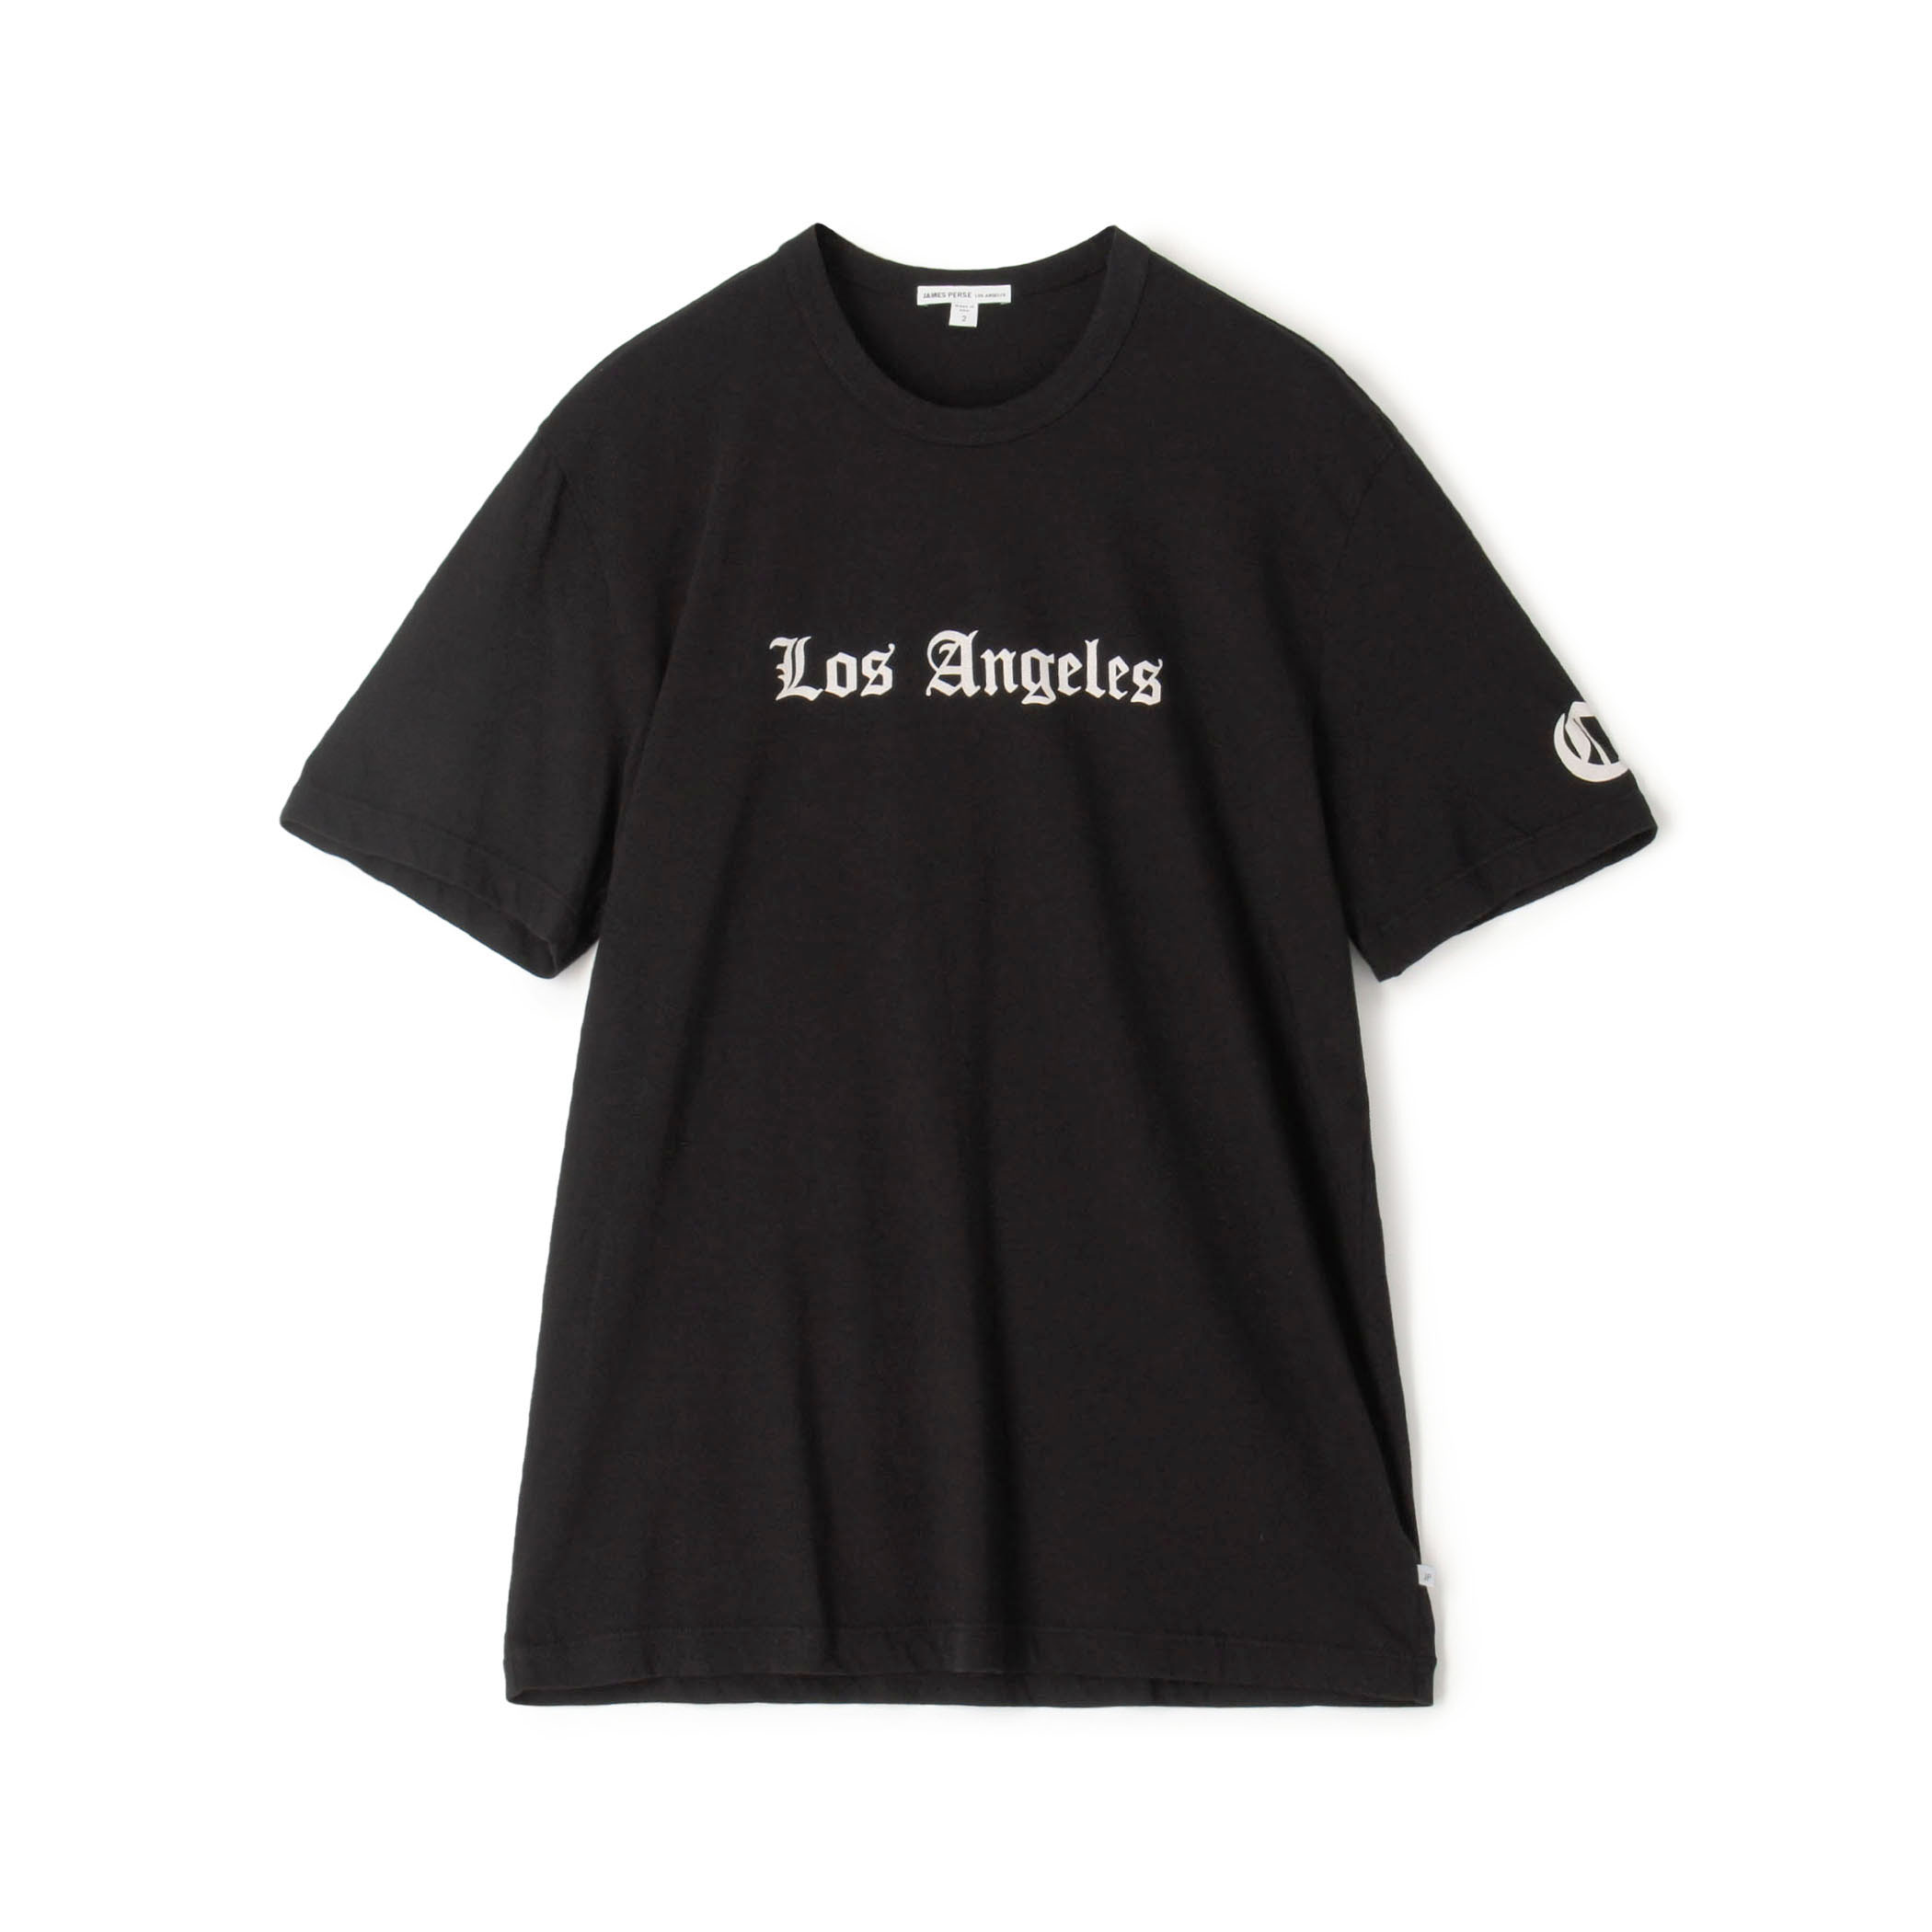 ☆James Parse☆LOS ANGELES Collection☆Tシャツ tic-guinee.net